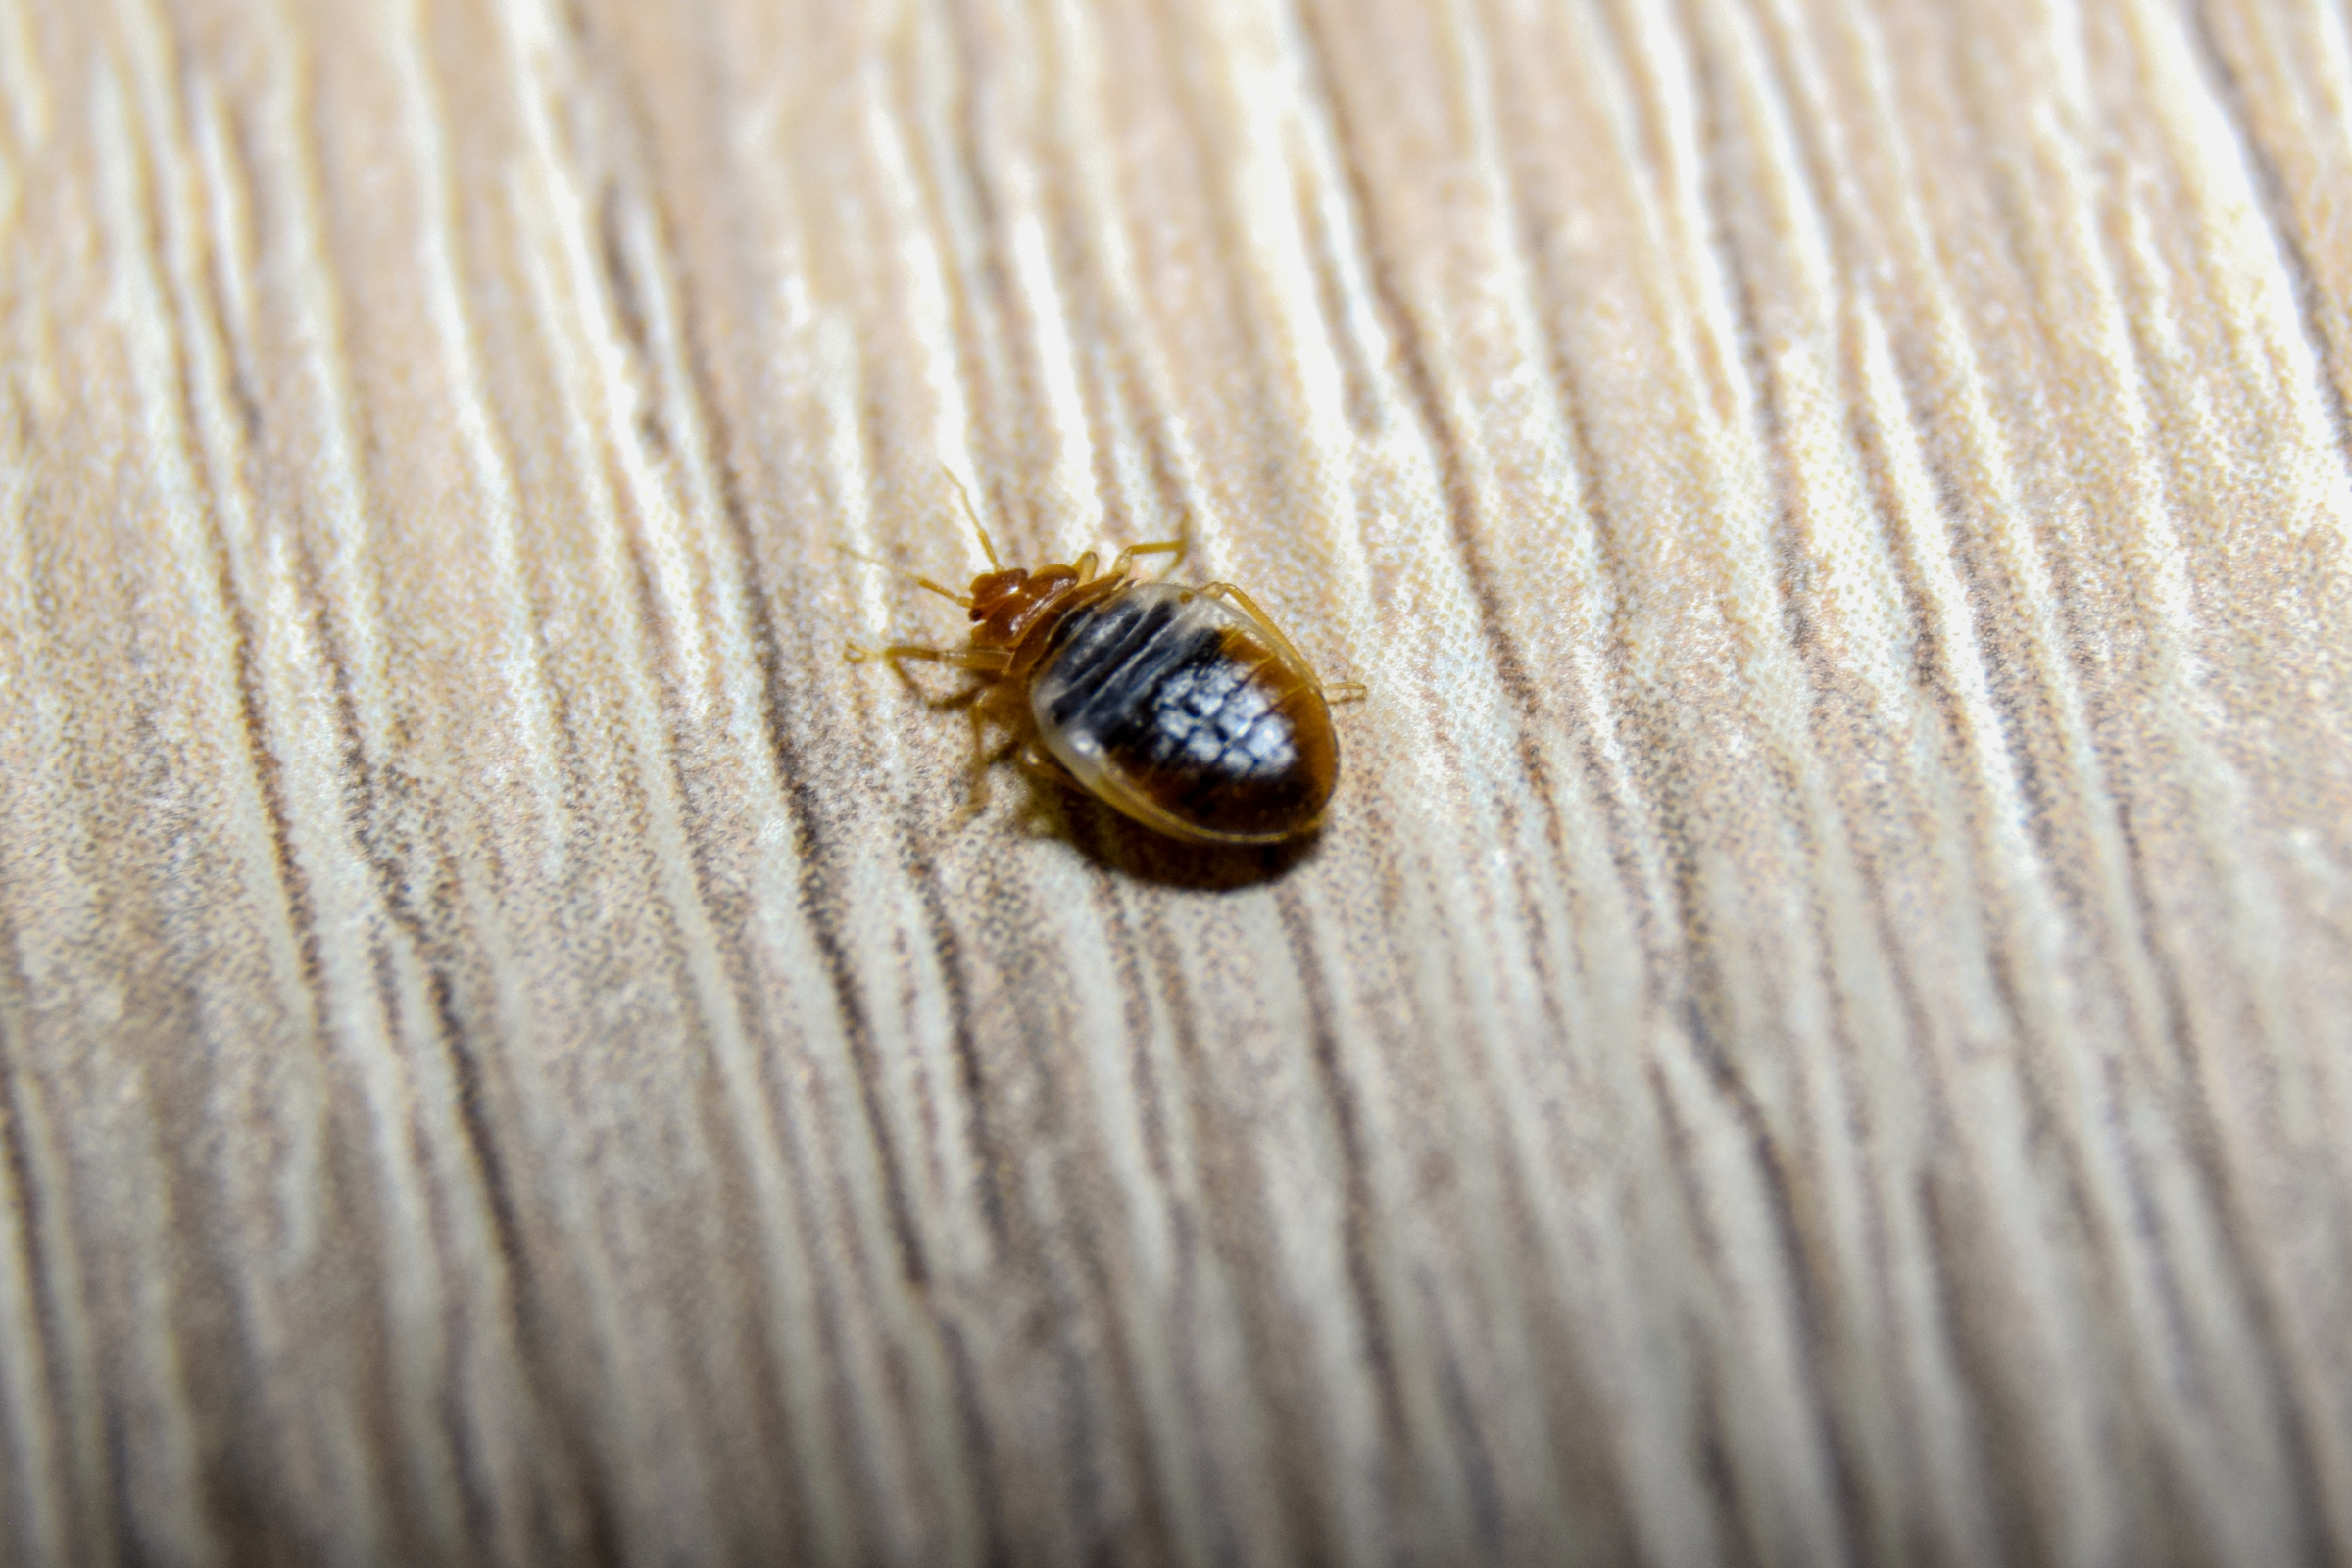 up close picture of a small reddish bedbug